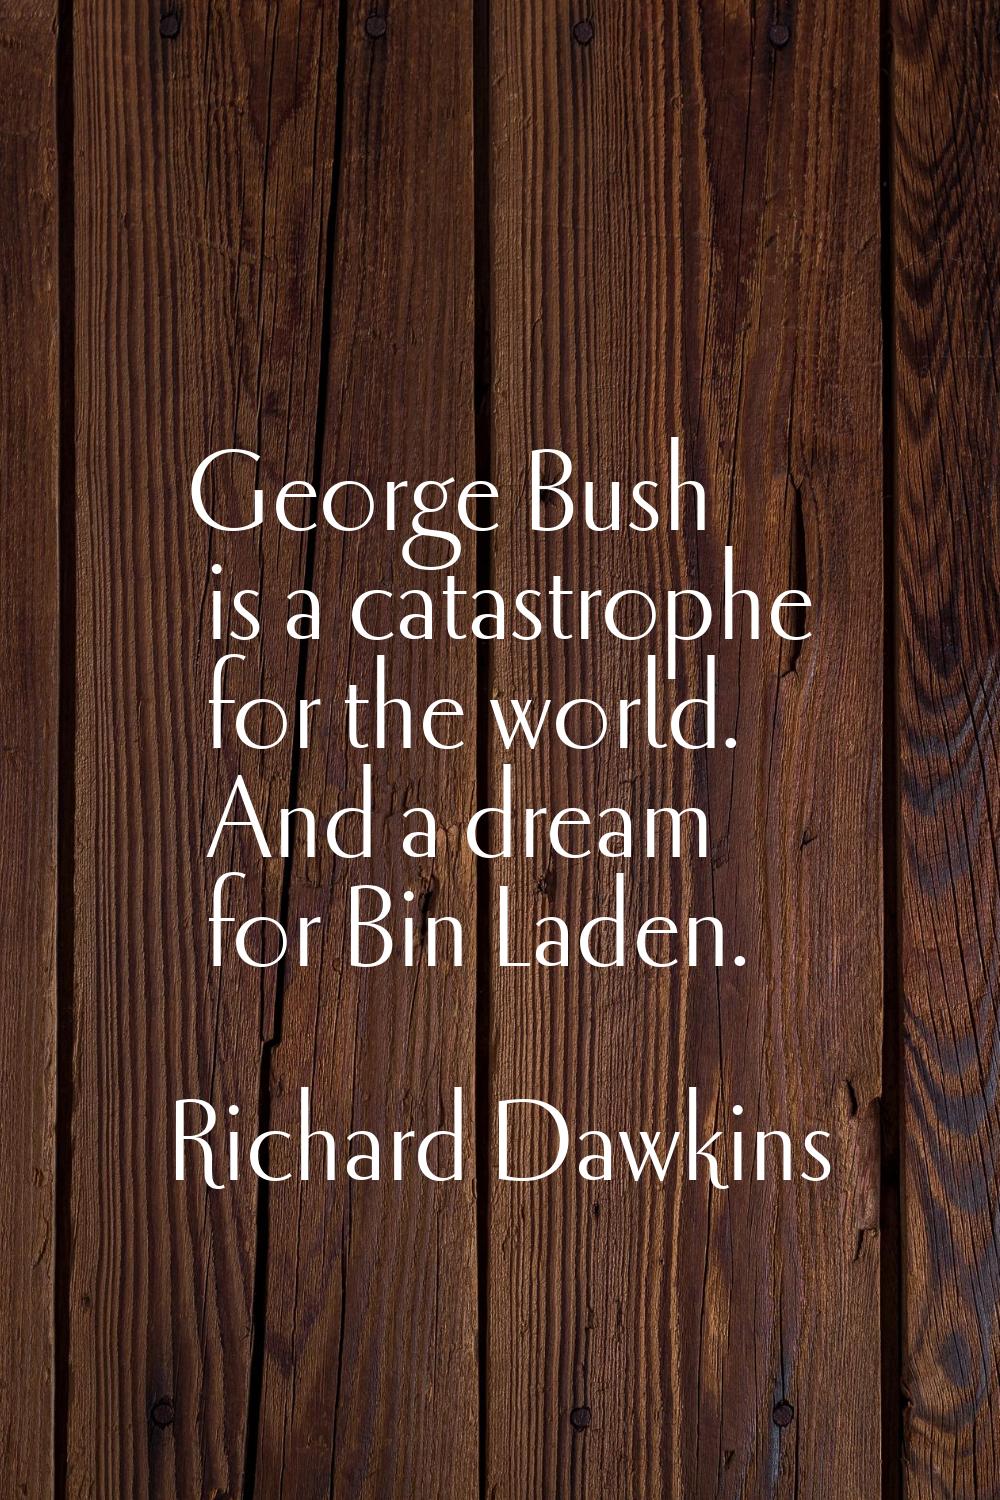 George Bush is a catastrophe for the world. And a dream for Bin Laden.